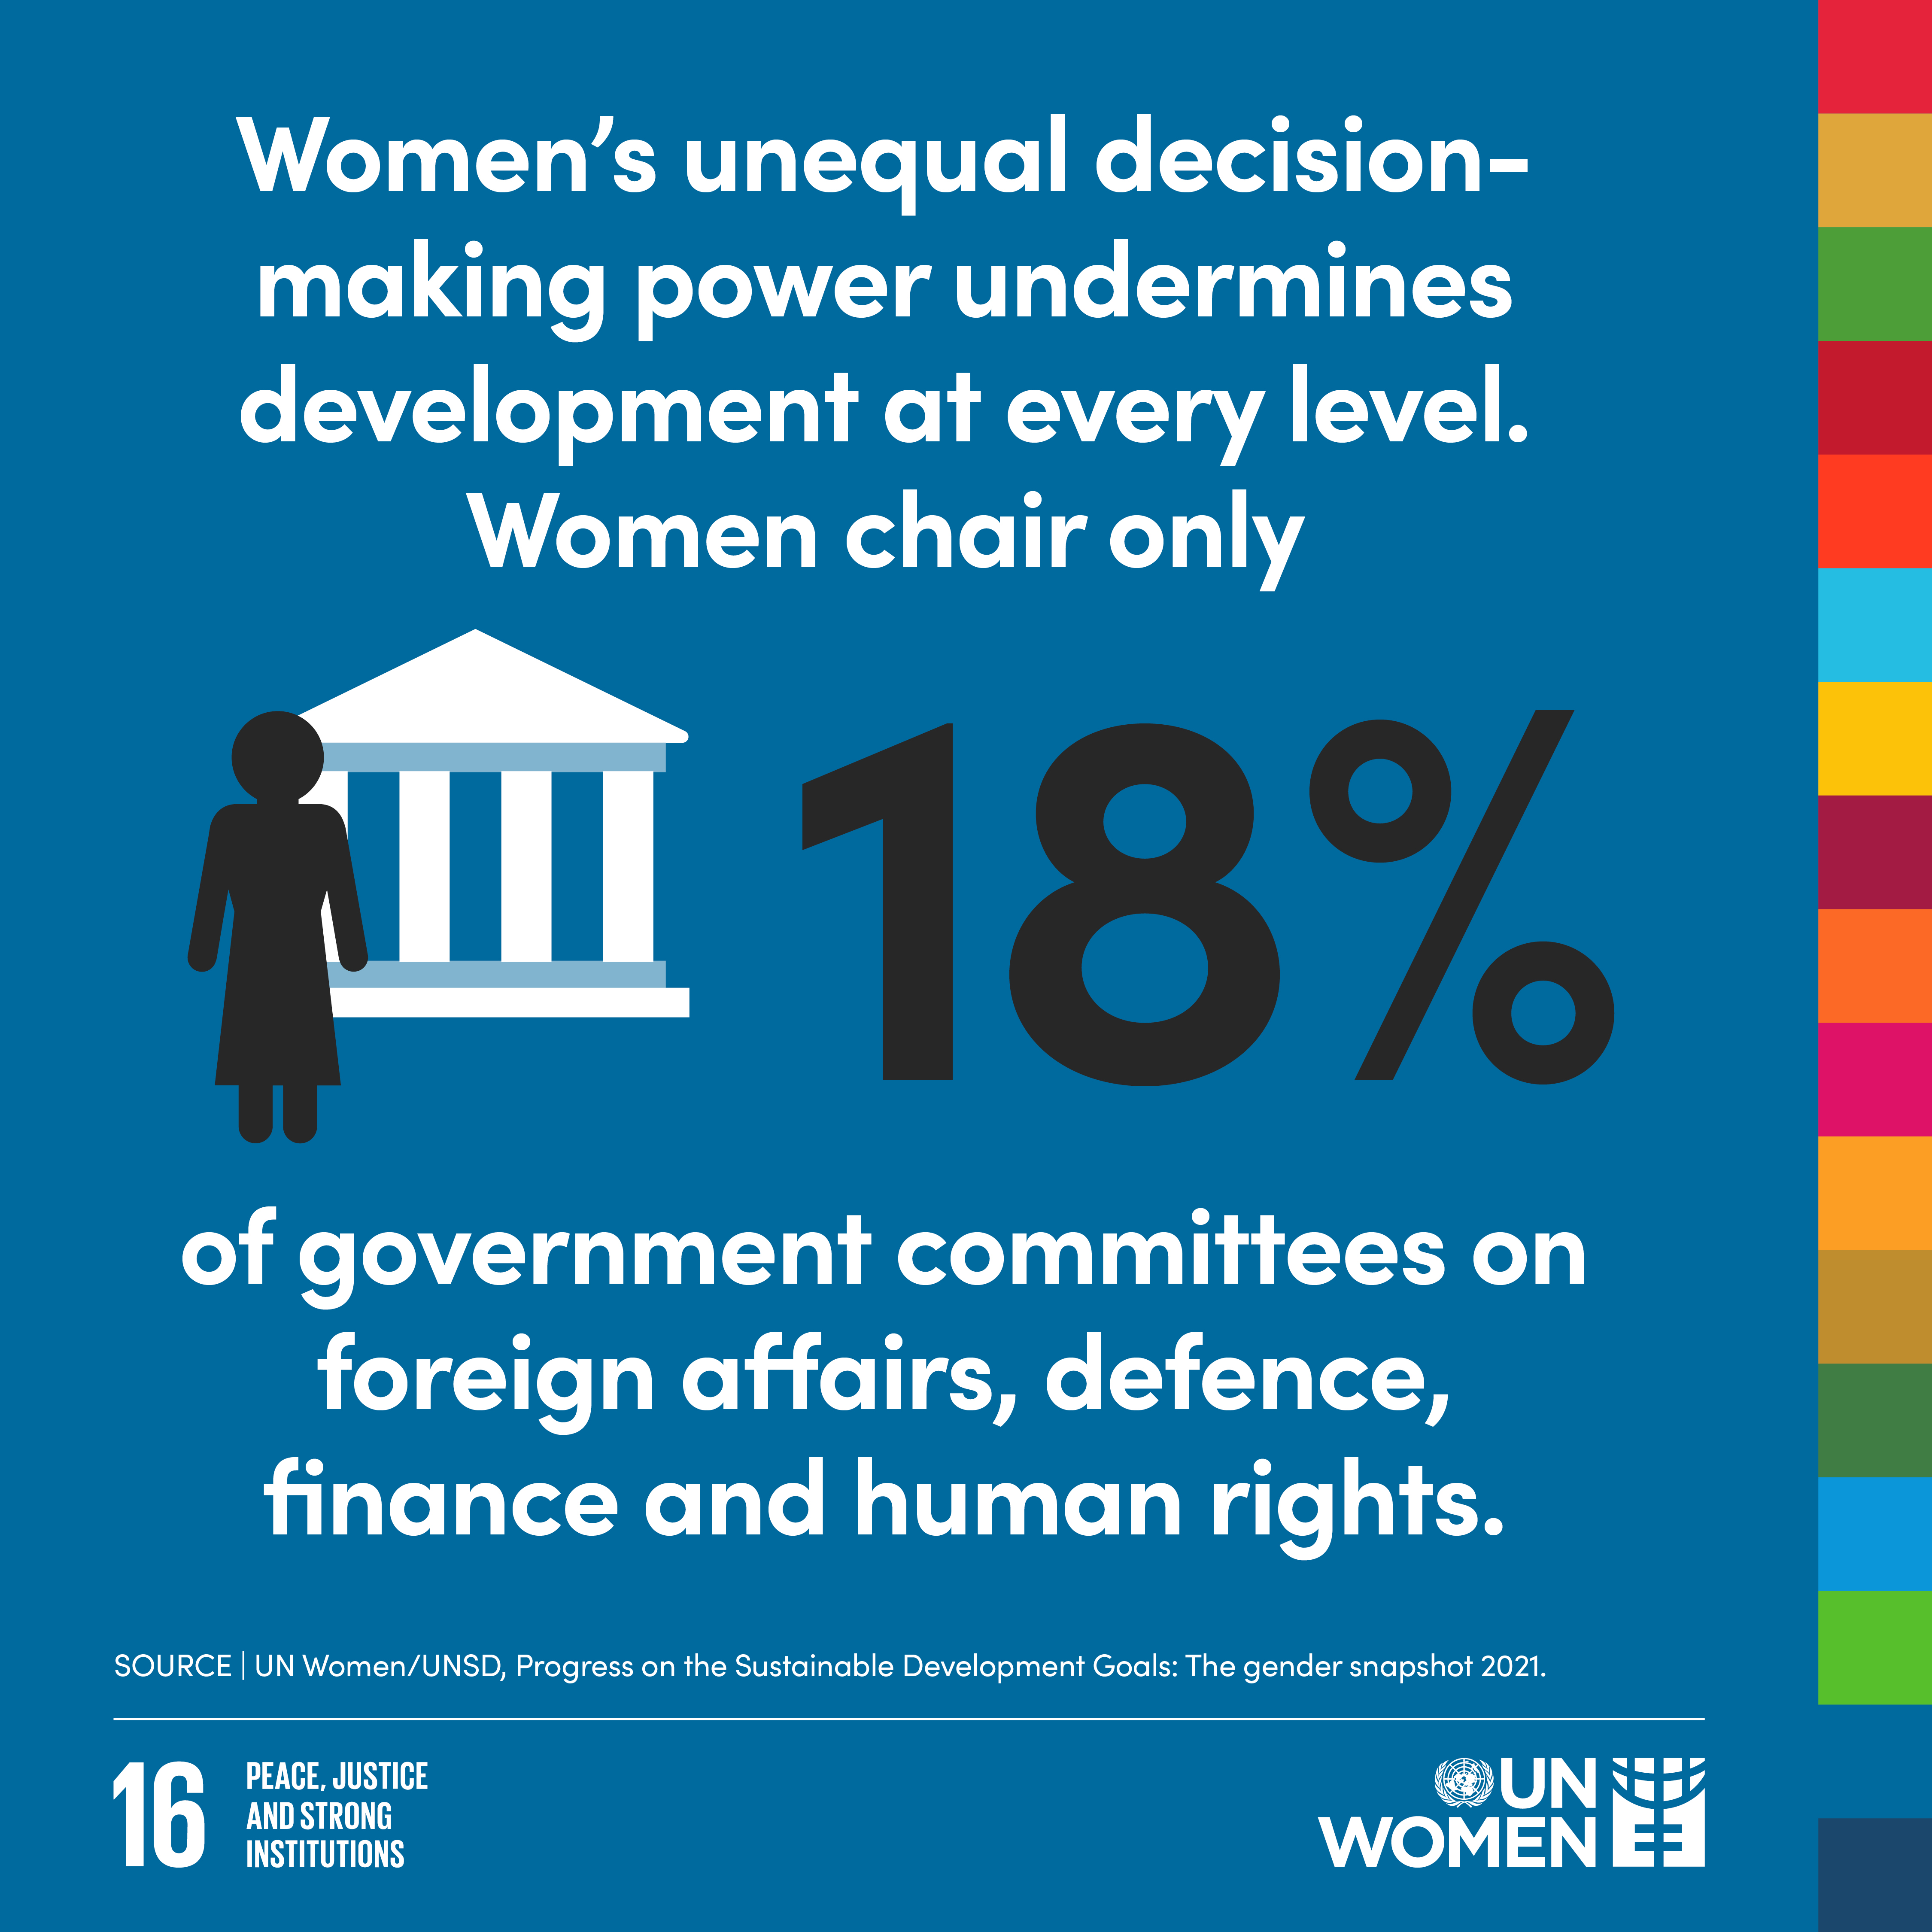 Women's unequal decision-making power undermines development at every level. Women only chair 18% of government committees on foreign affairs, defence and human rights. 